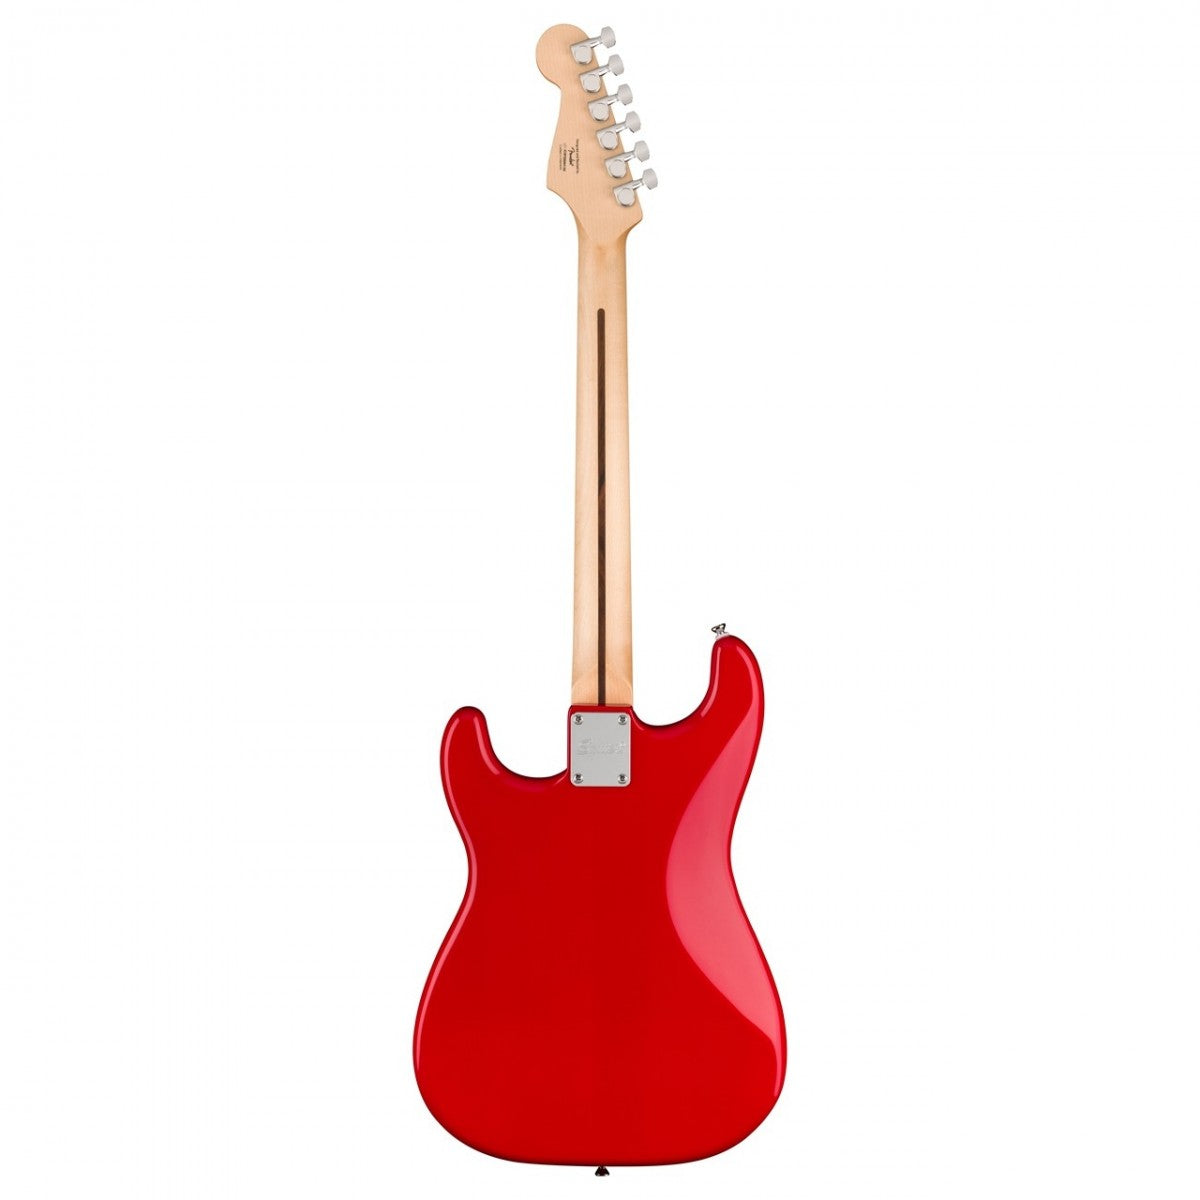 Squier Sonic Series Stratocaster HT Laurel Fingerboard, Torino Red - Việt Music